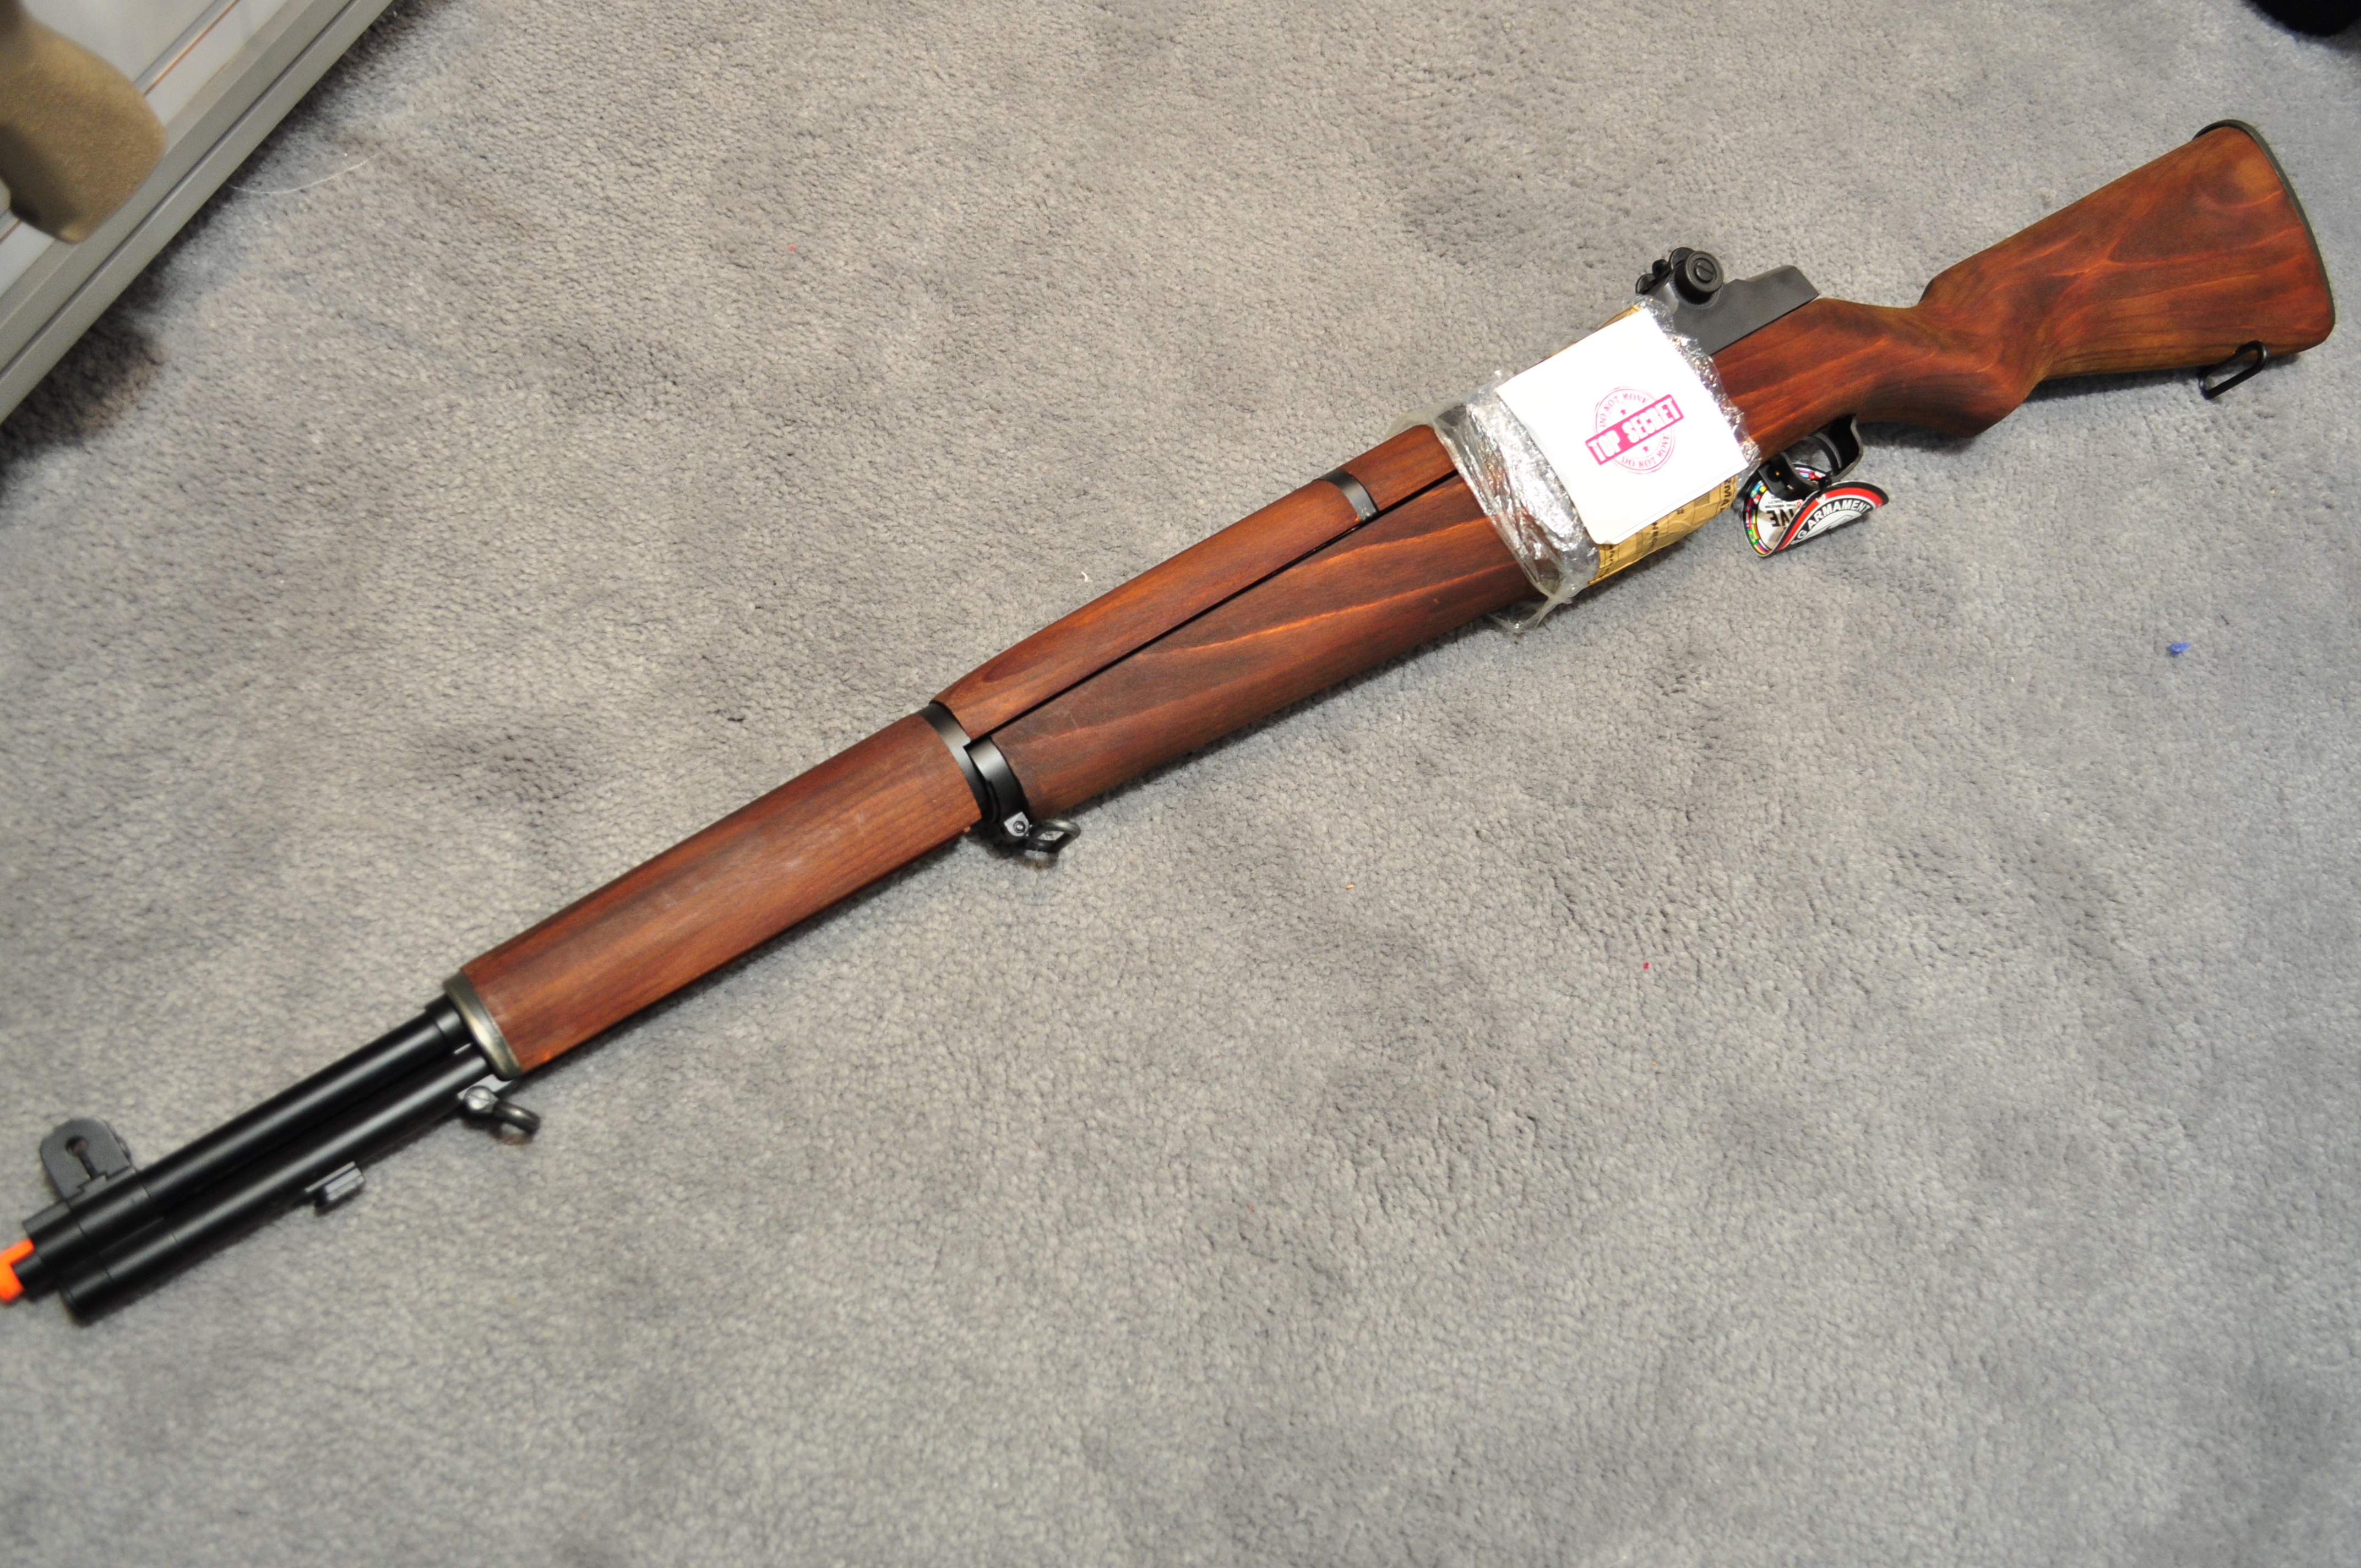 G&G’s new releases this year is their M1 Garand replica. 